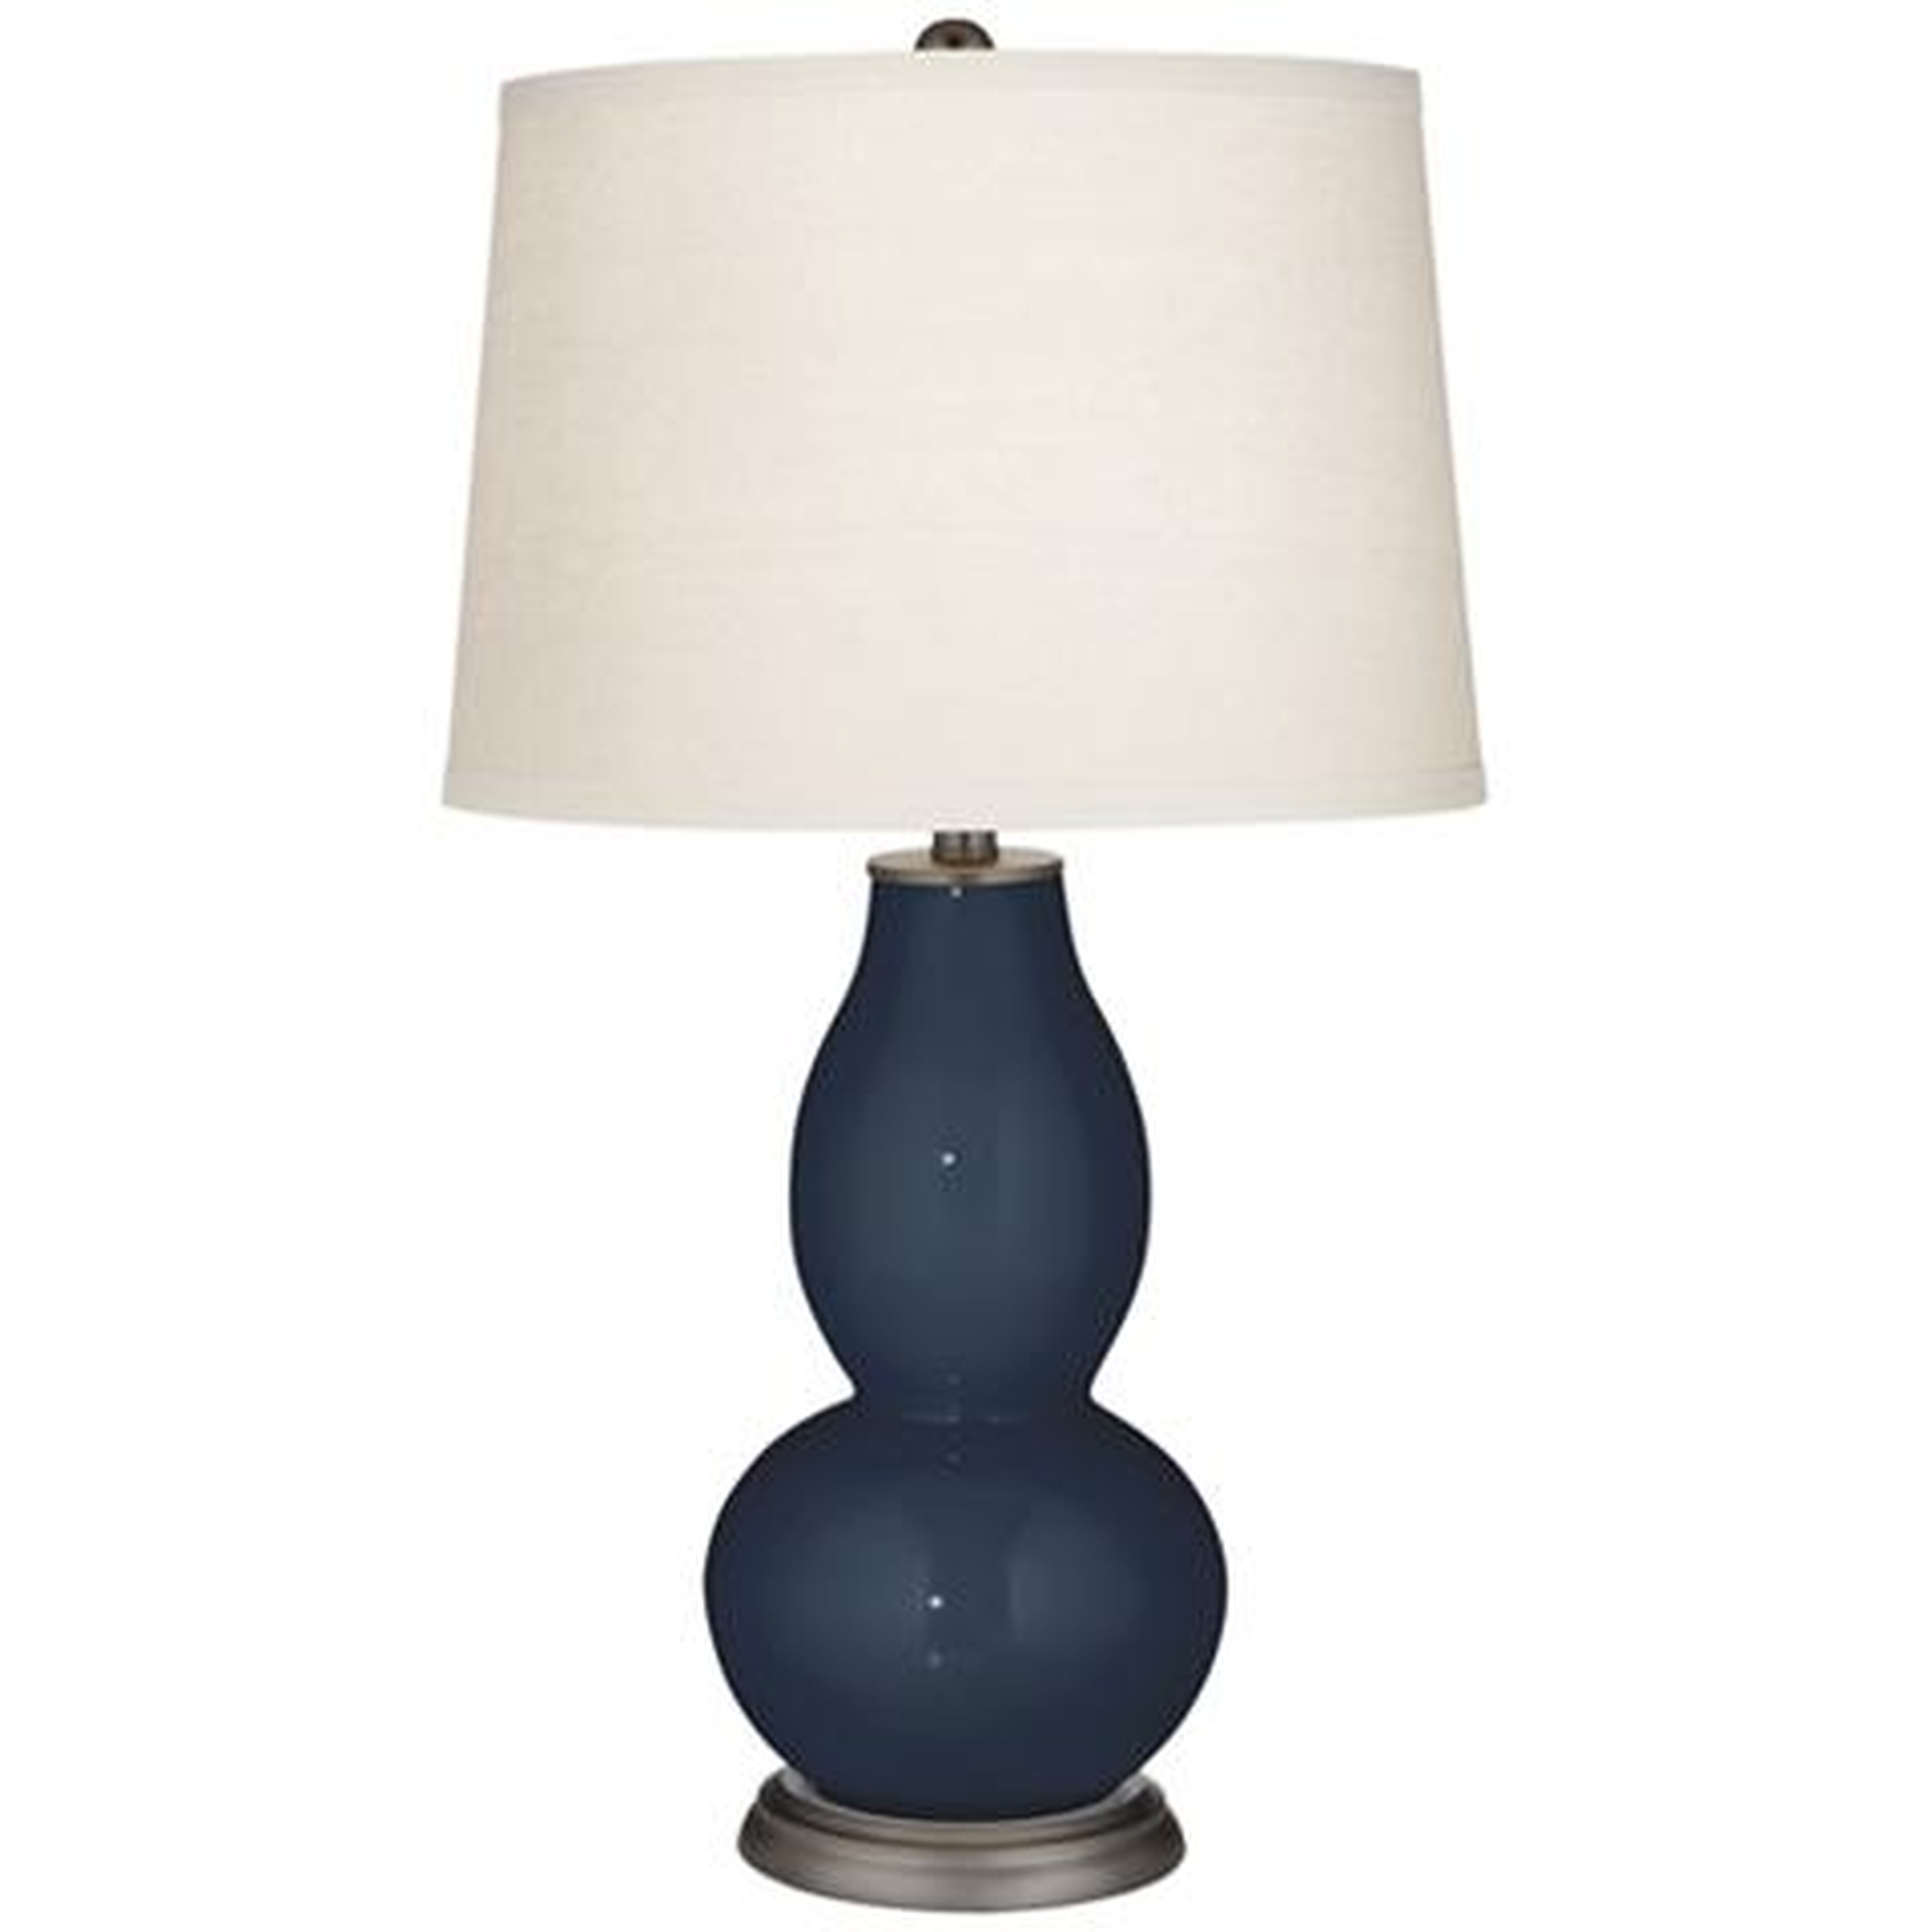 Naval Double Gourd Table Lamp - Style # 9K818 - Lamps Plus